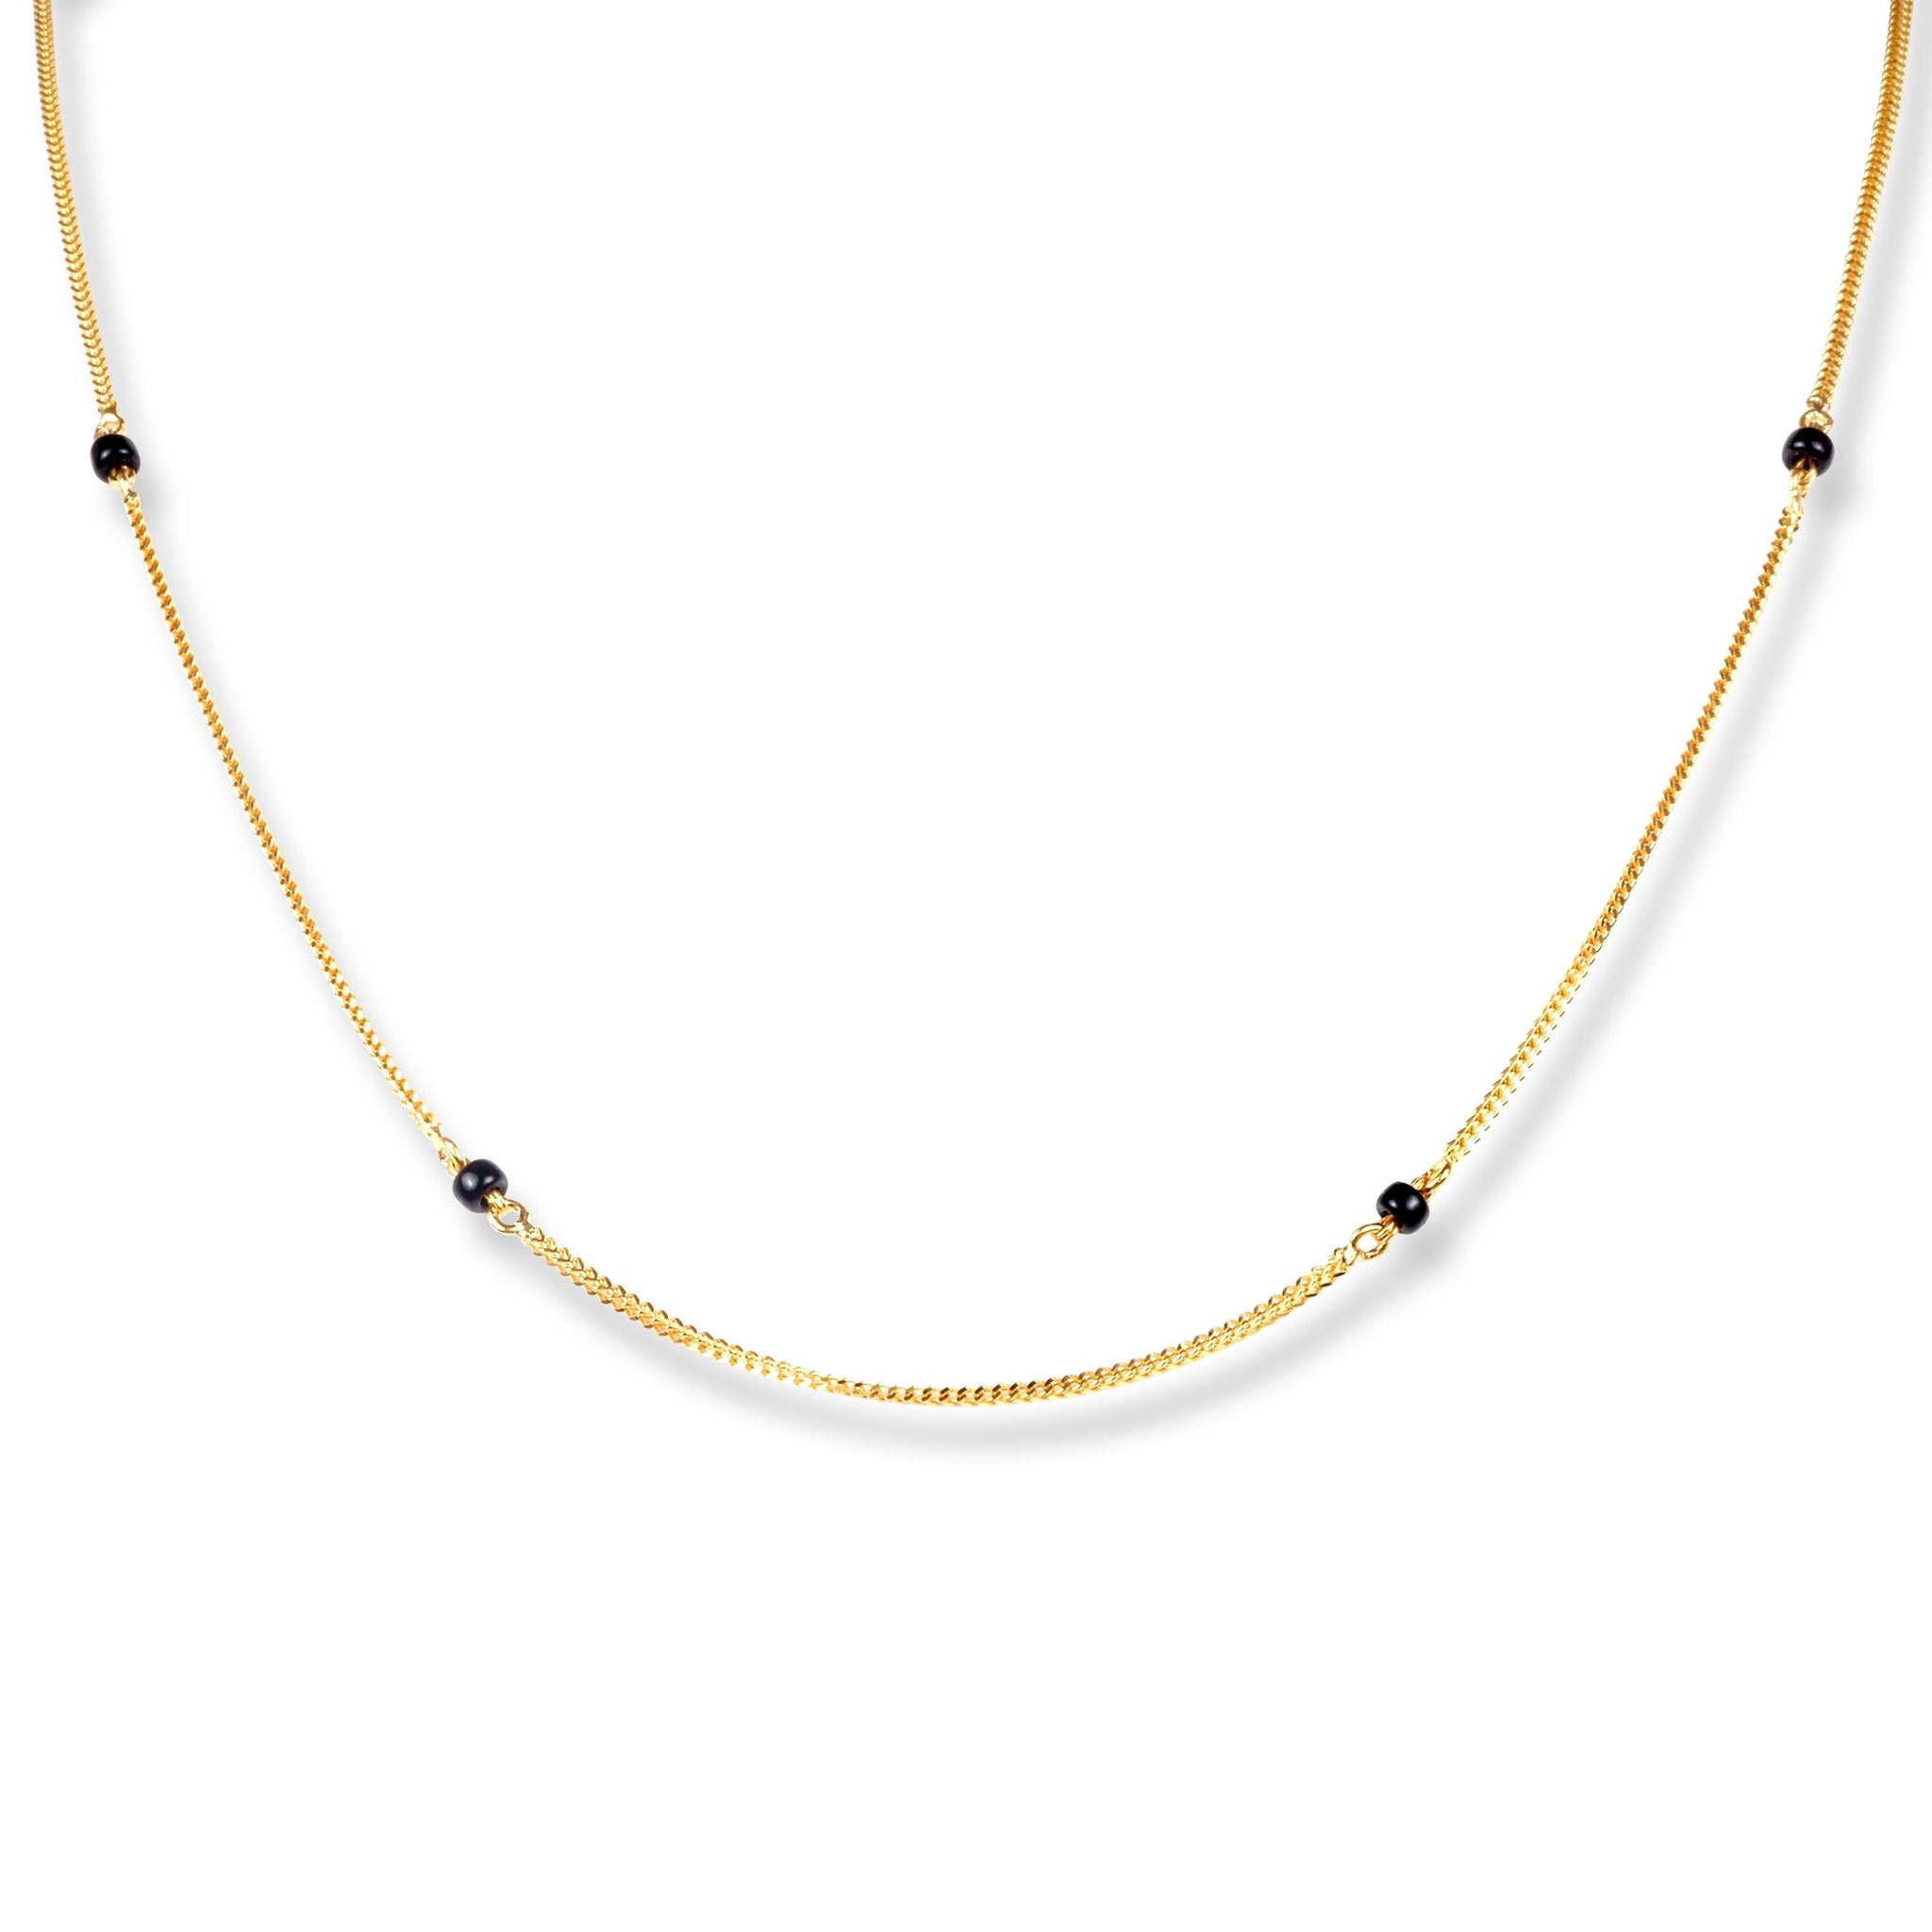 22ct Gold Foxtail Chain with Single Black Beads at Intervals with Lobster Clasp C-7144